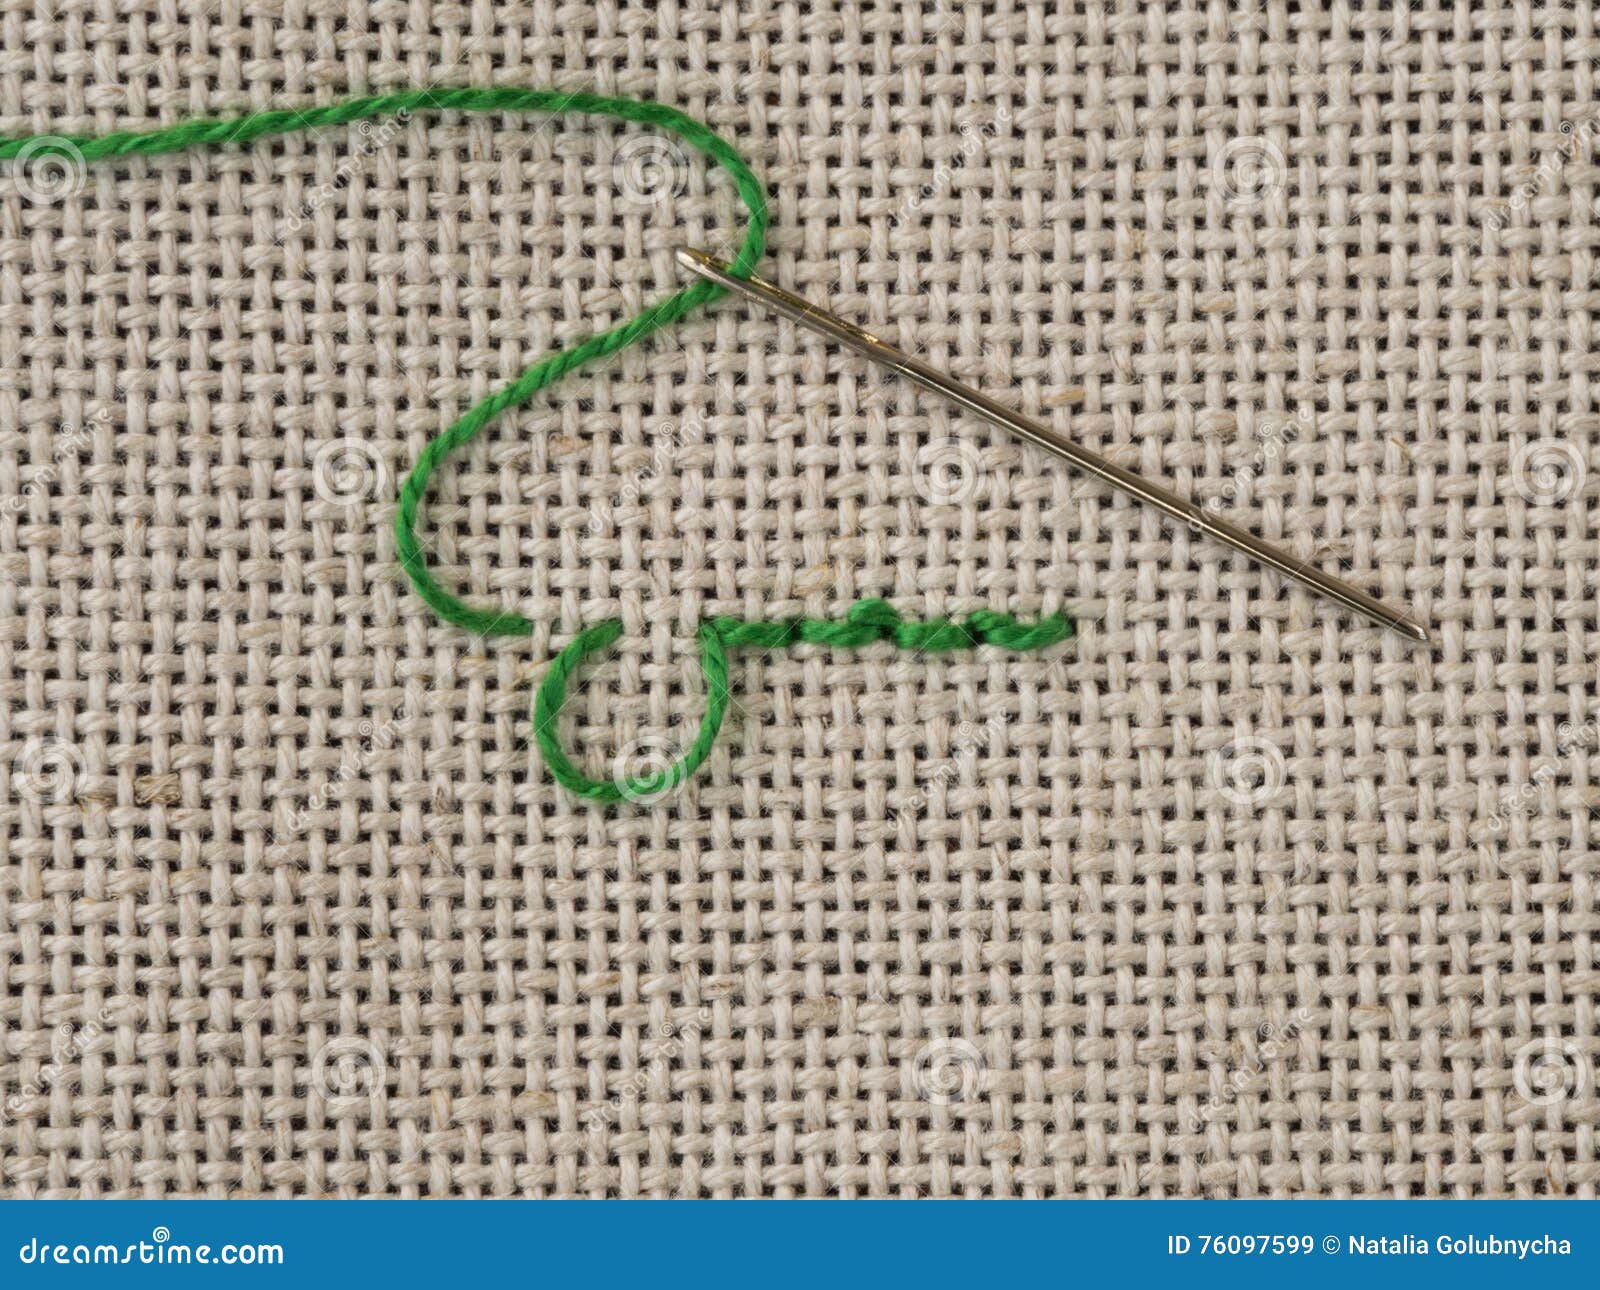 Some Embroidery Stitches on the Canvas Stock Image - Image of stitch,  handmade: 76097599